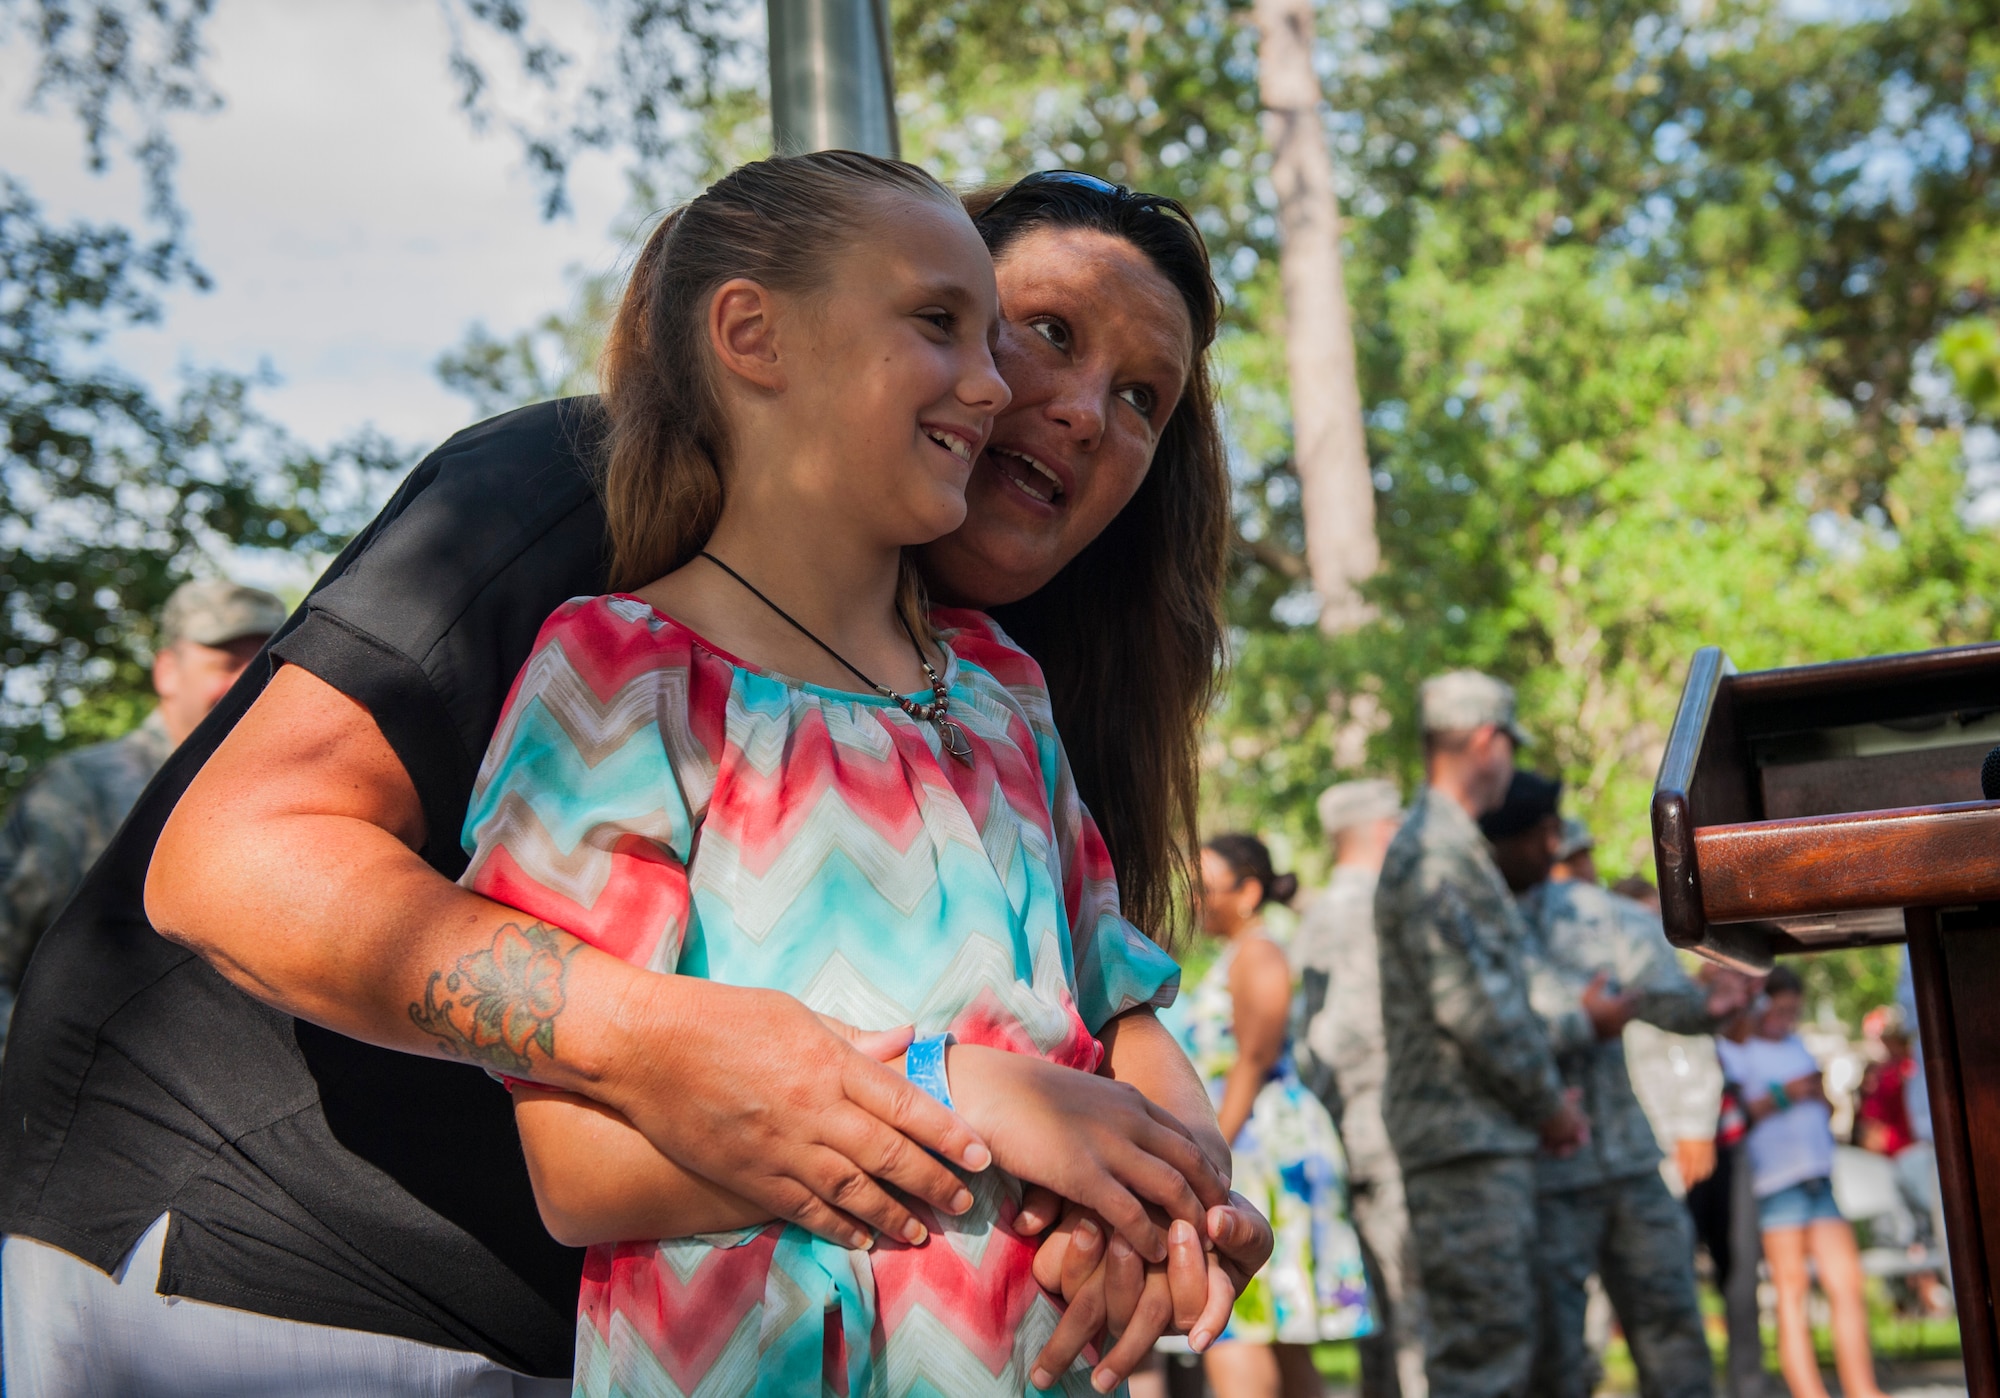 Tracy Bozeman, former 58th Fighter Squadron supply personnel, tells her daughter, Carly, stories about Master Sgt. Kendall Kitson, Jr., 58th FS production superintendent and fallen Nomad, after the 19th anniversary Khobar Tower memorial ceremony, June 25, 2015, on Eglin Air Force Base, Florida. Bozeman, a Nomad for 10 years, spoke highly of Kitson, a flight line supervisor during the deployment, and how he was the best and most patient supervisor she had ever worked with in the Air Force. (U.S. Air Force photo/Staff Sgt. Marleah Robertson)